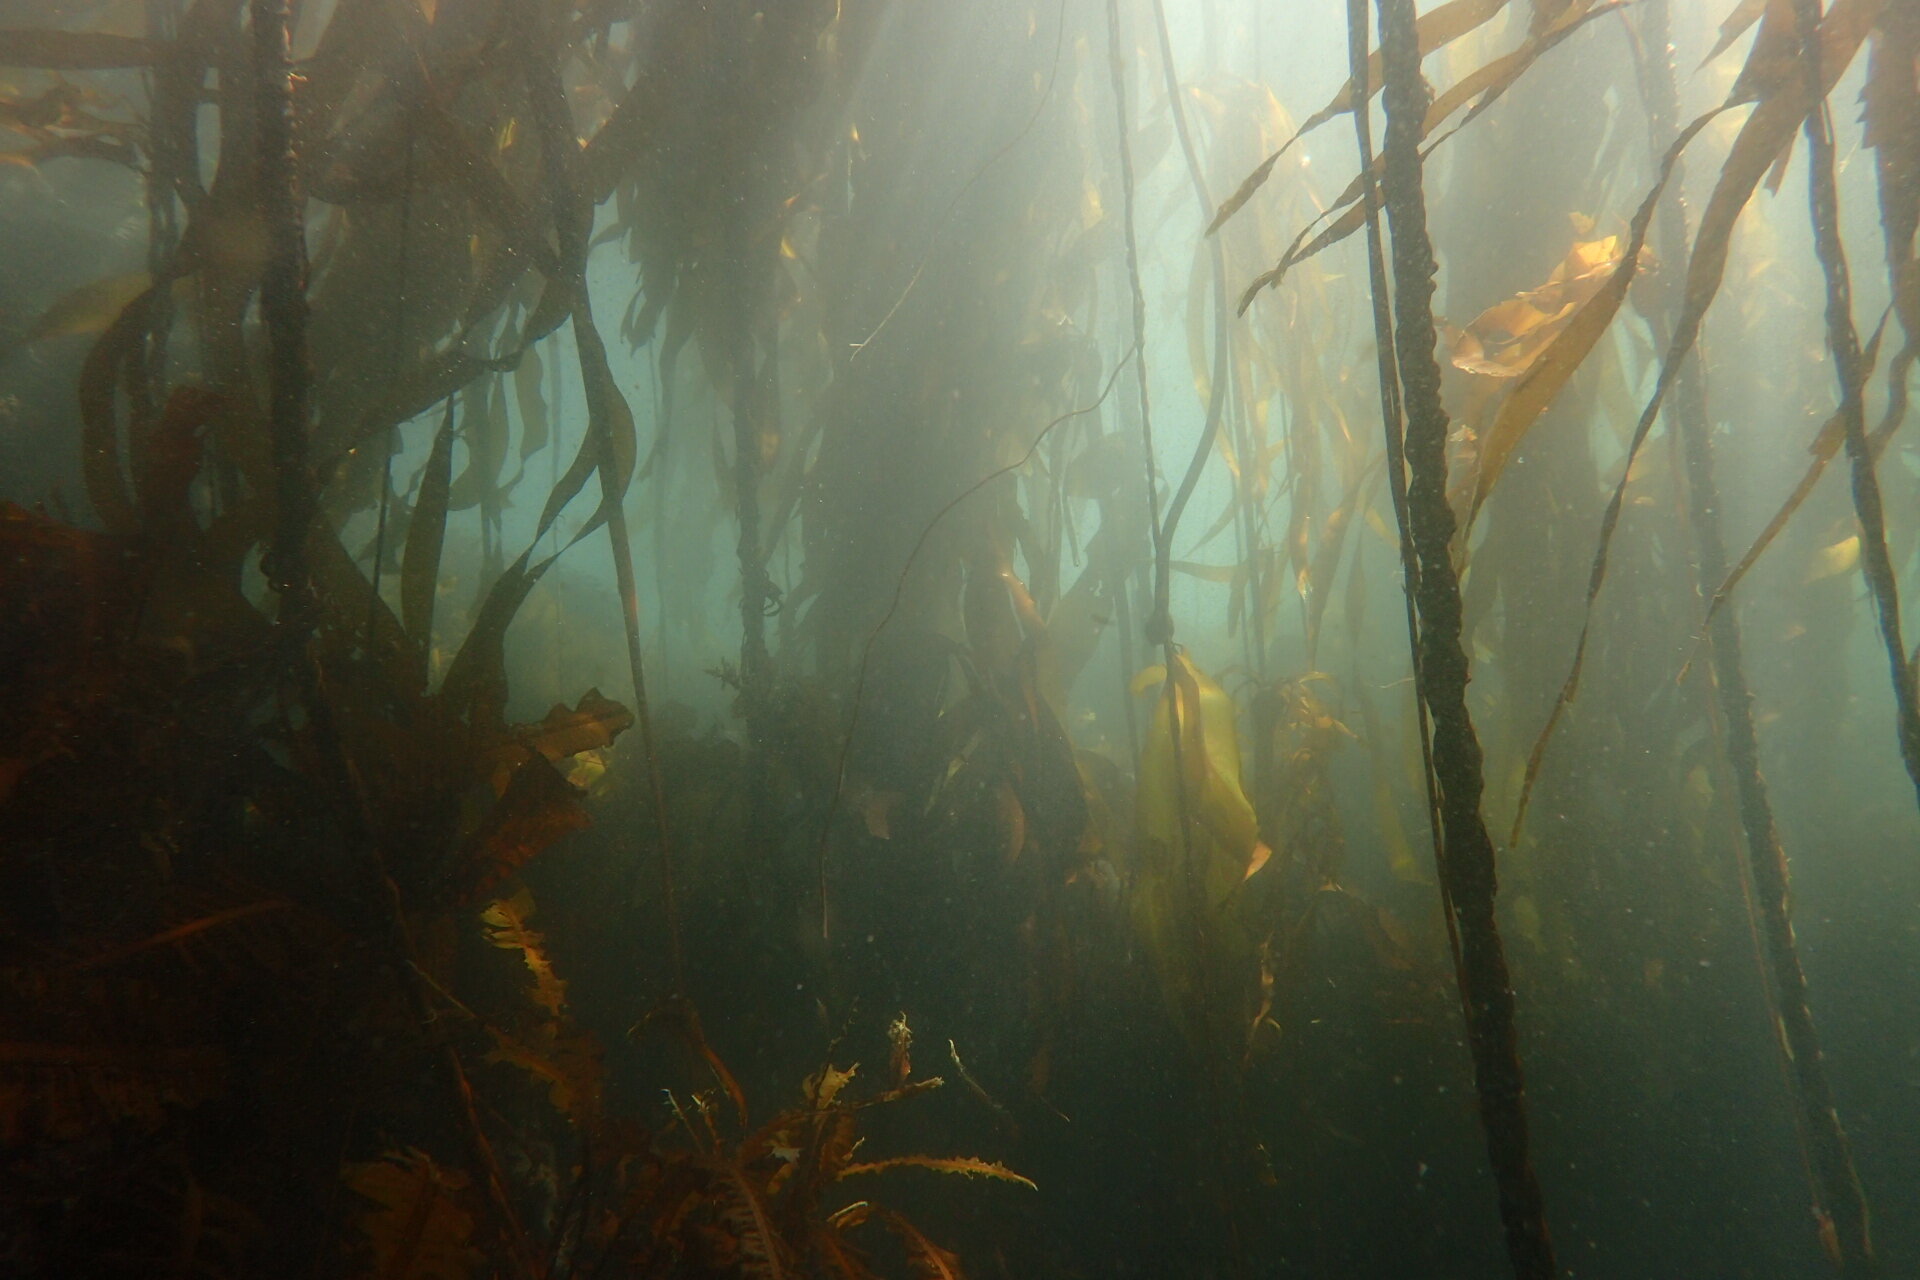  Kelp forests support diverse life but are threatened by overgrazing of sea urchin herbivores. 